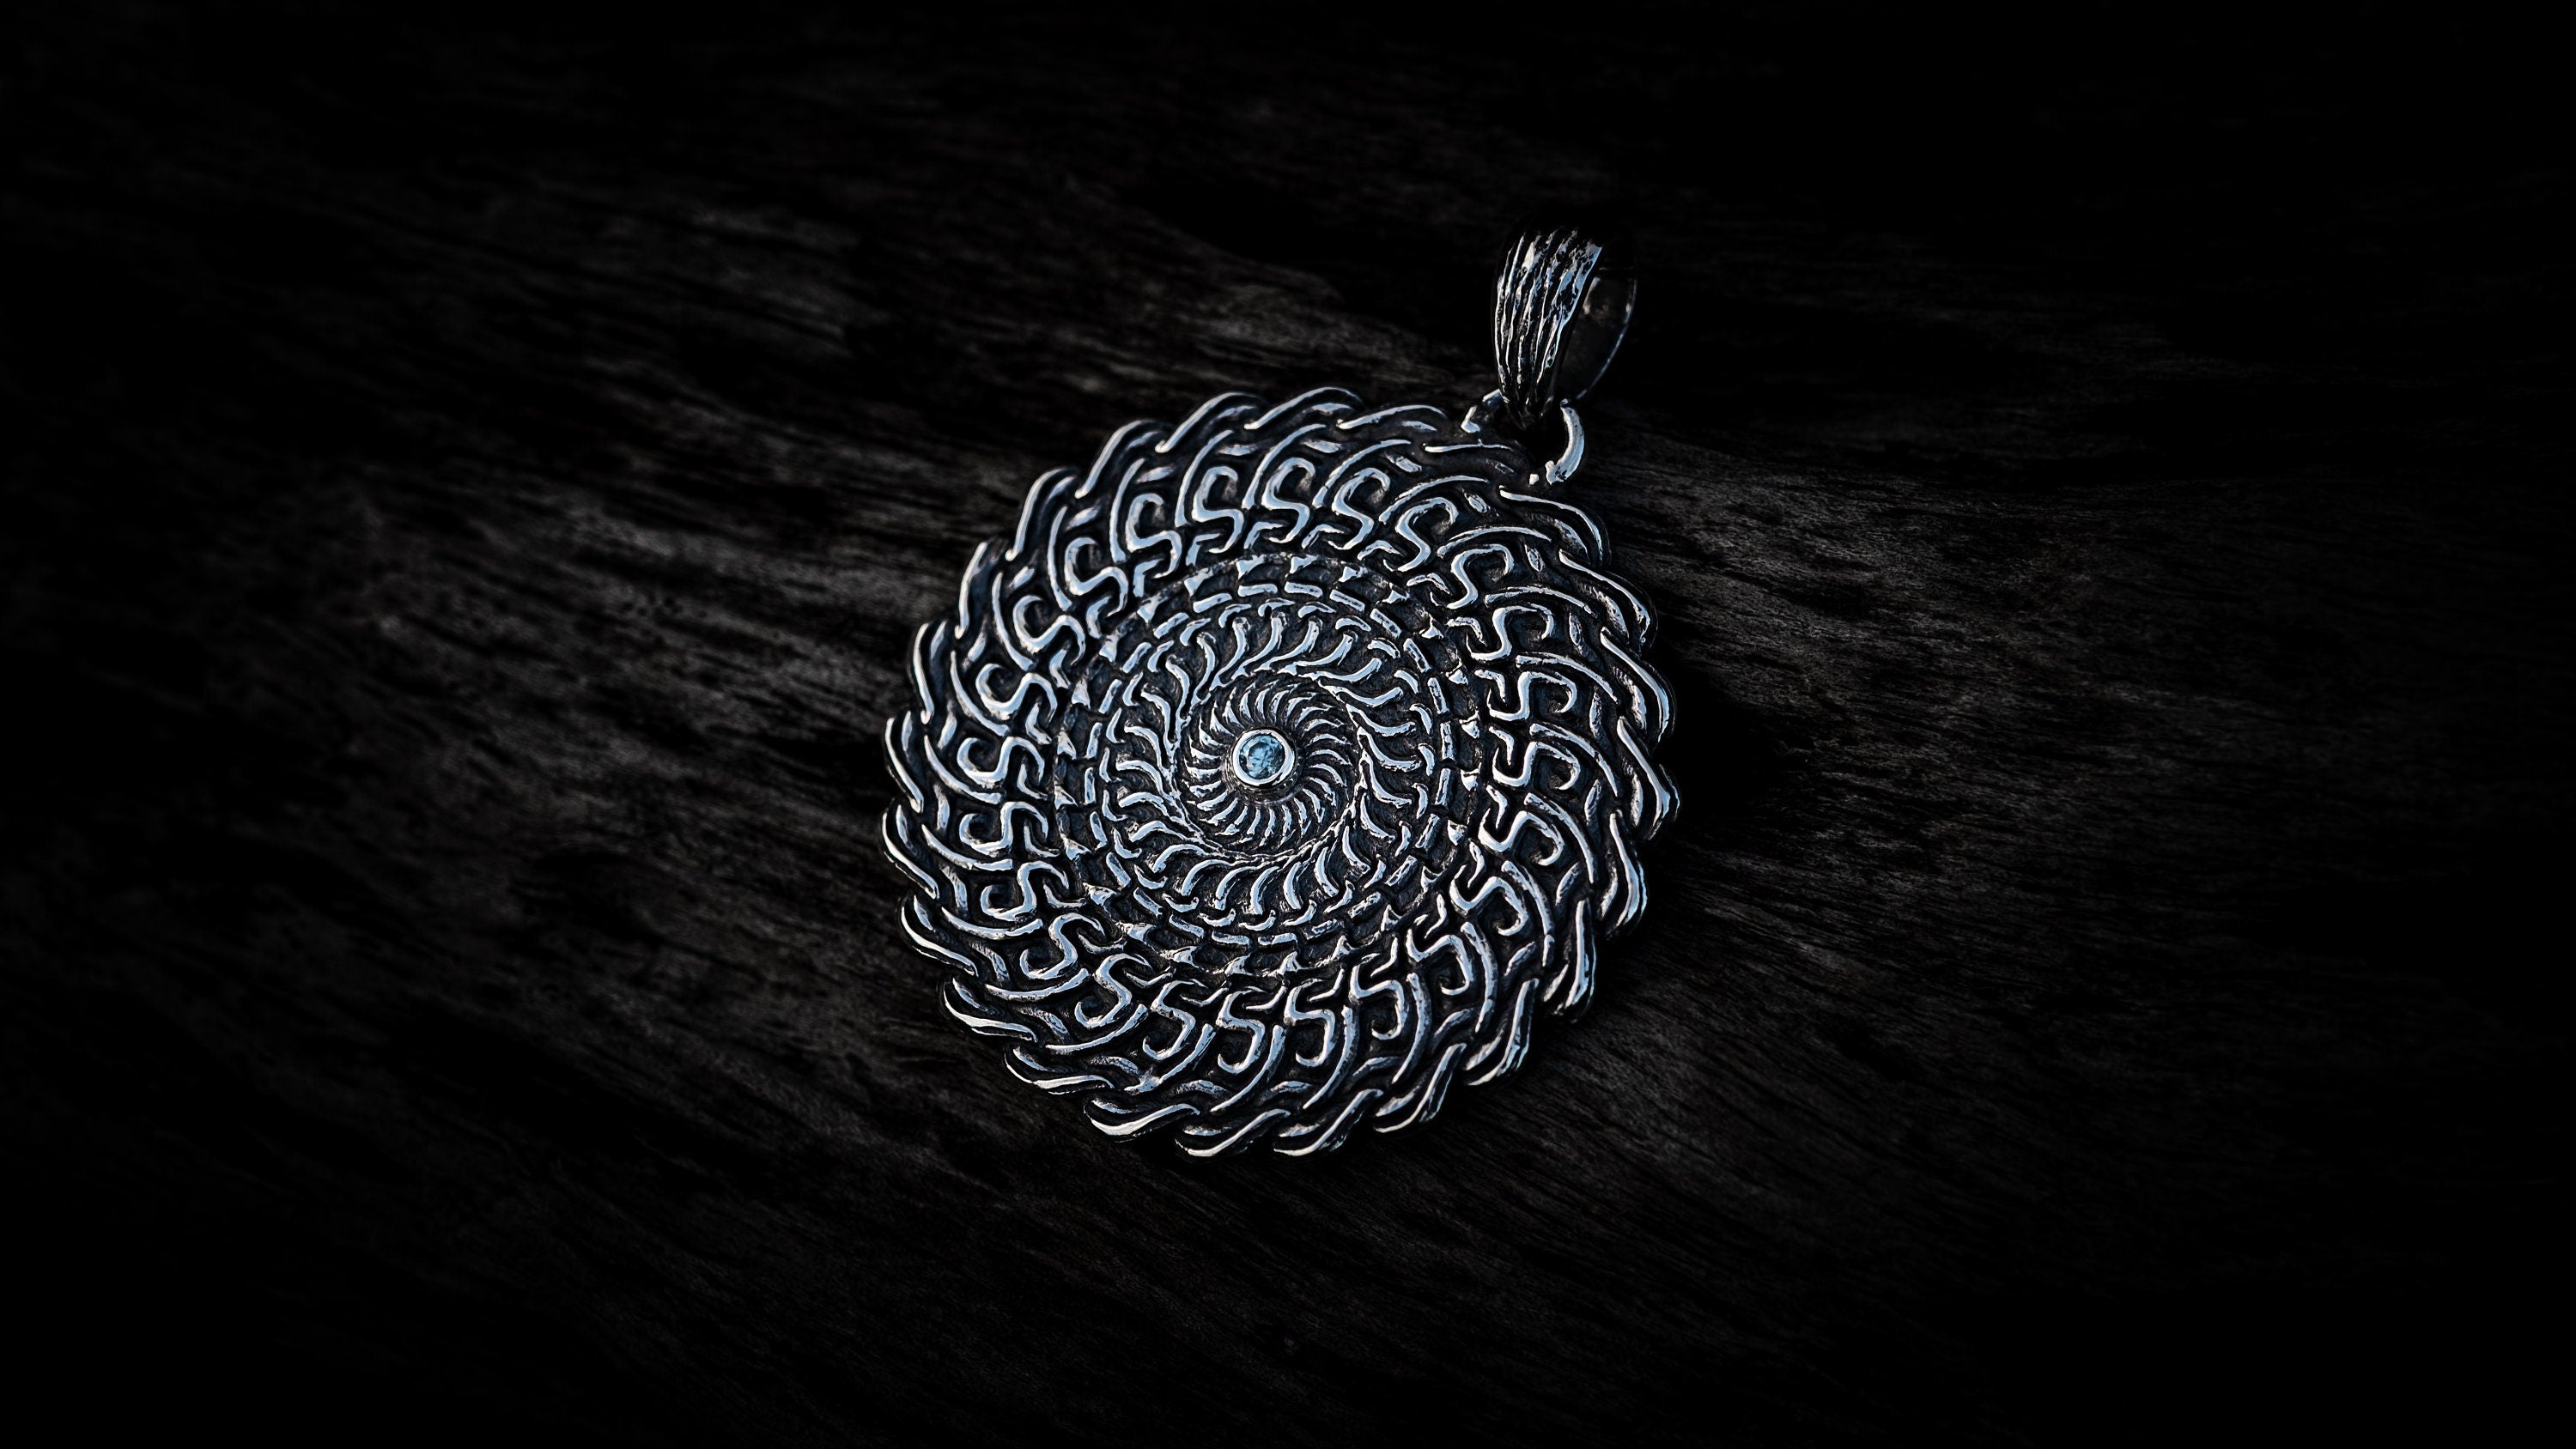 Silver Yggdrasil Necklace